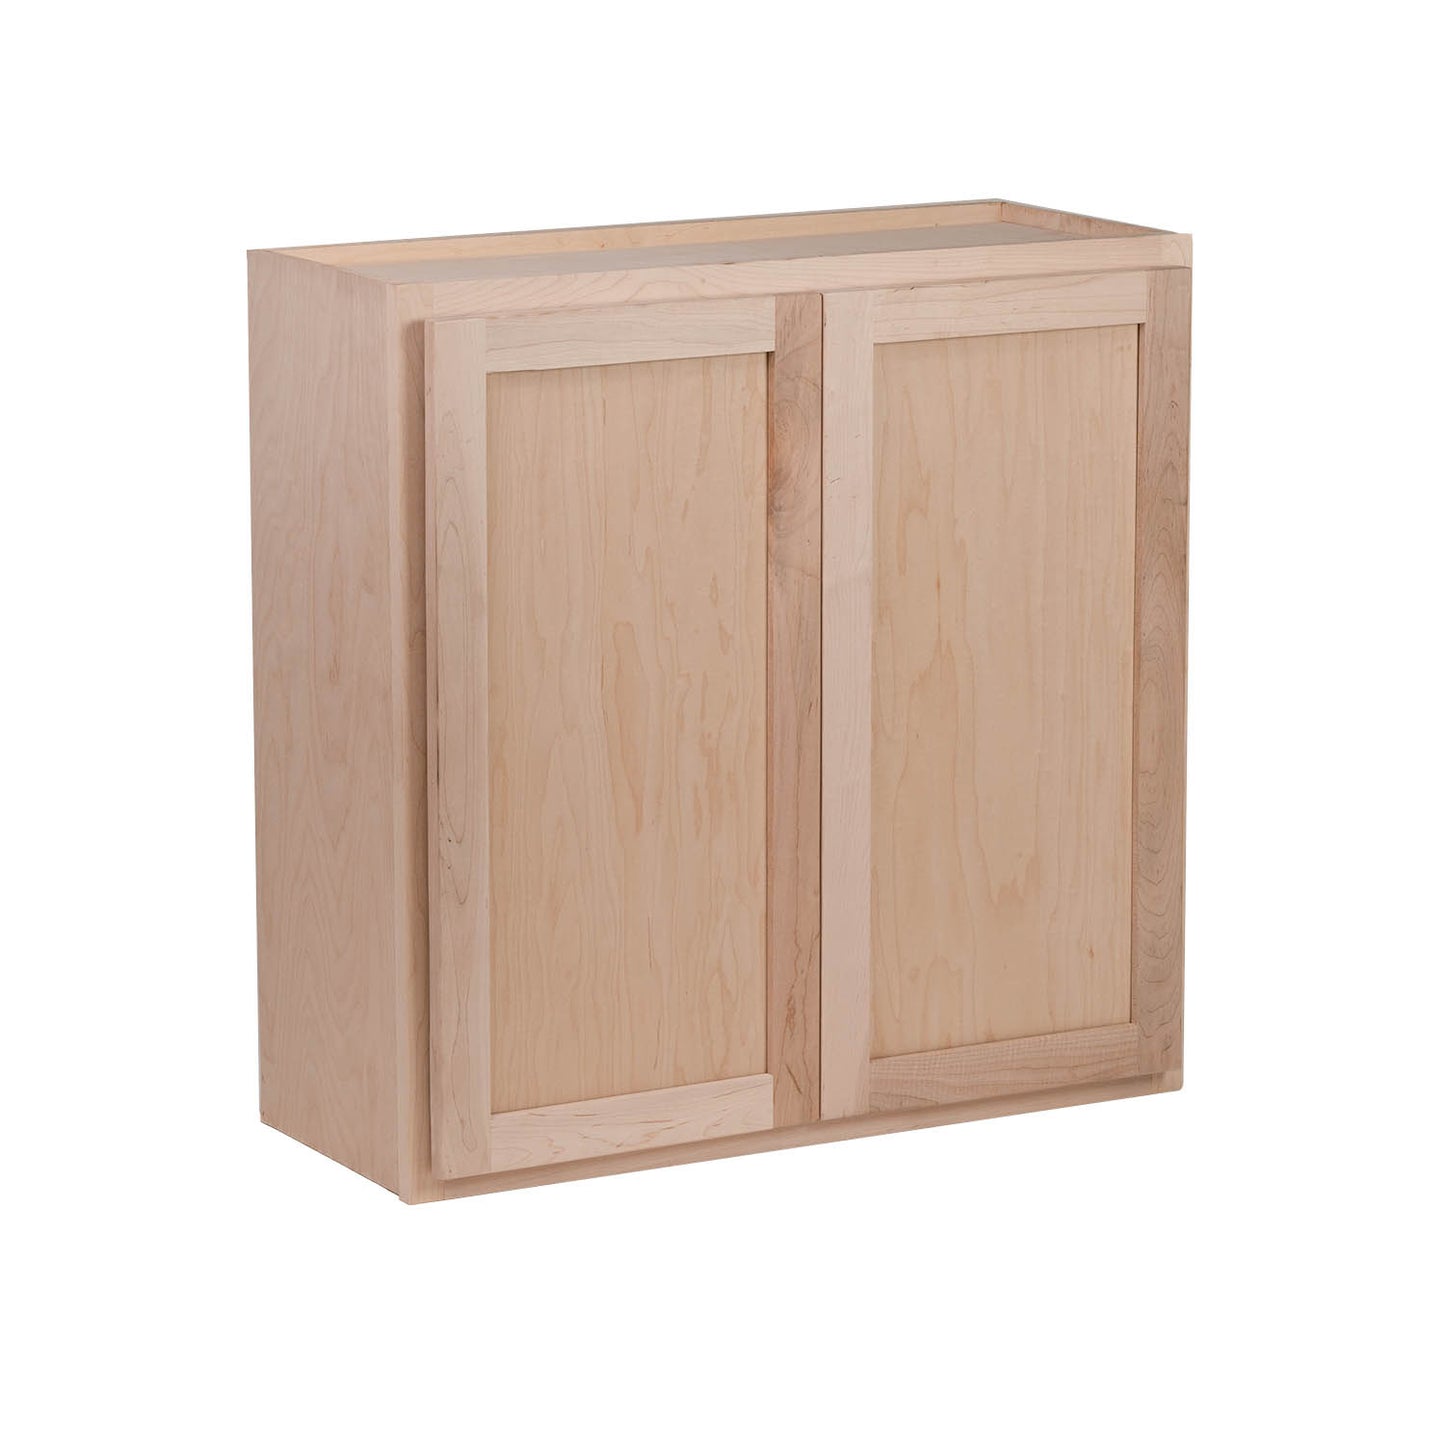 Backwoods Cabinetry RTA - Winding River Collection - W3630.BUTT - Raw Maple 36"Wx30"Hx12"D Wall Cabinet